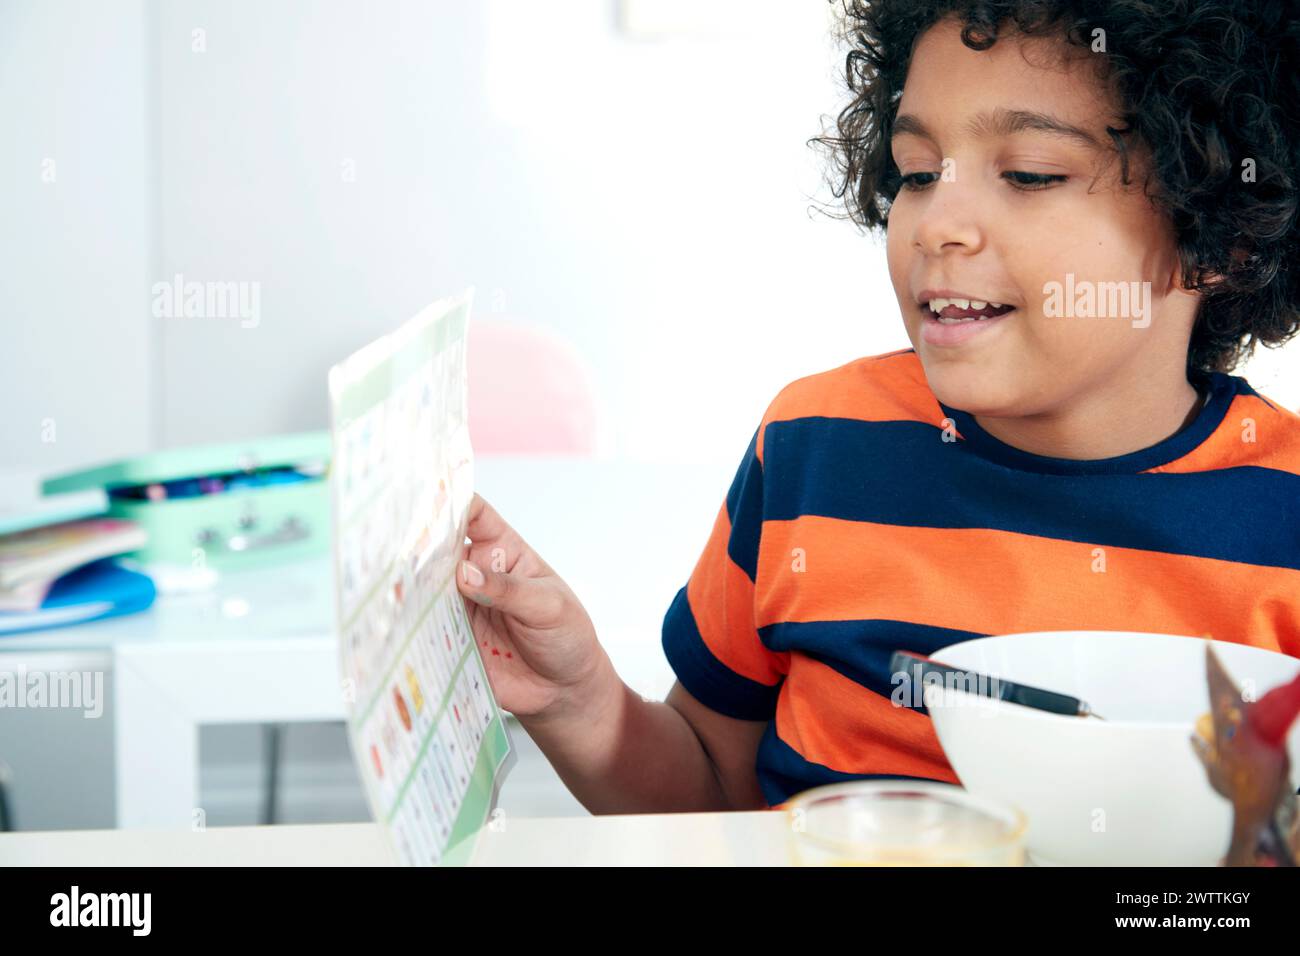 Child reading a menu at a table Stock Photo